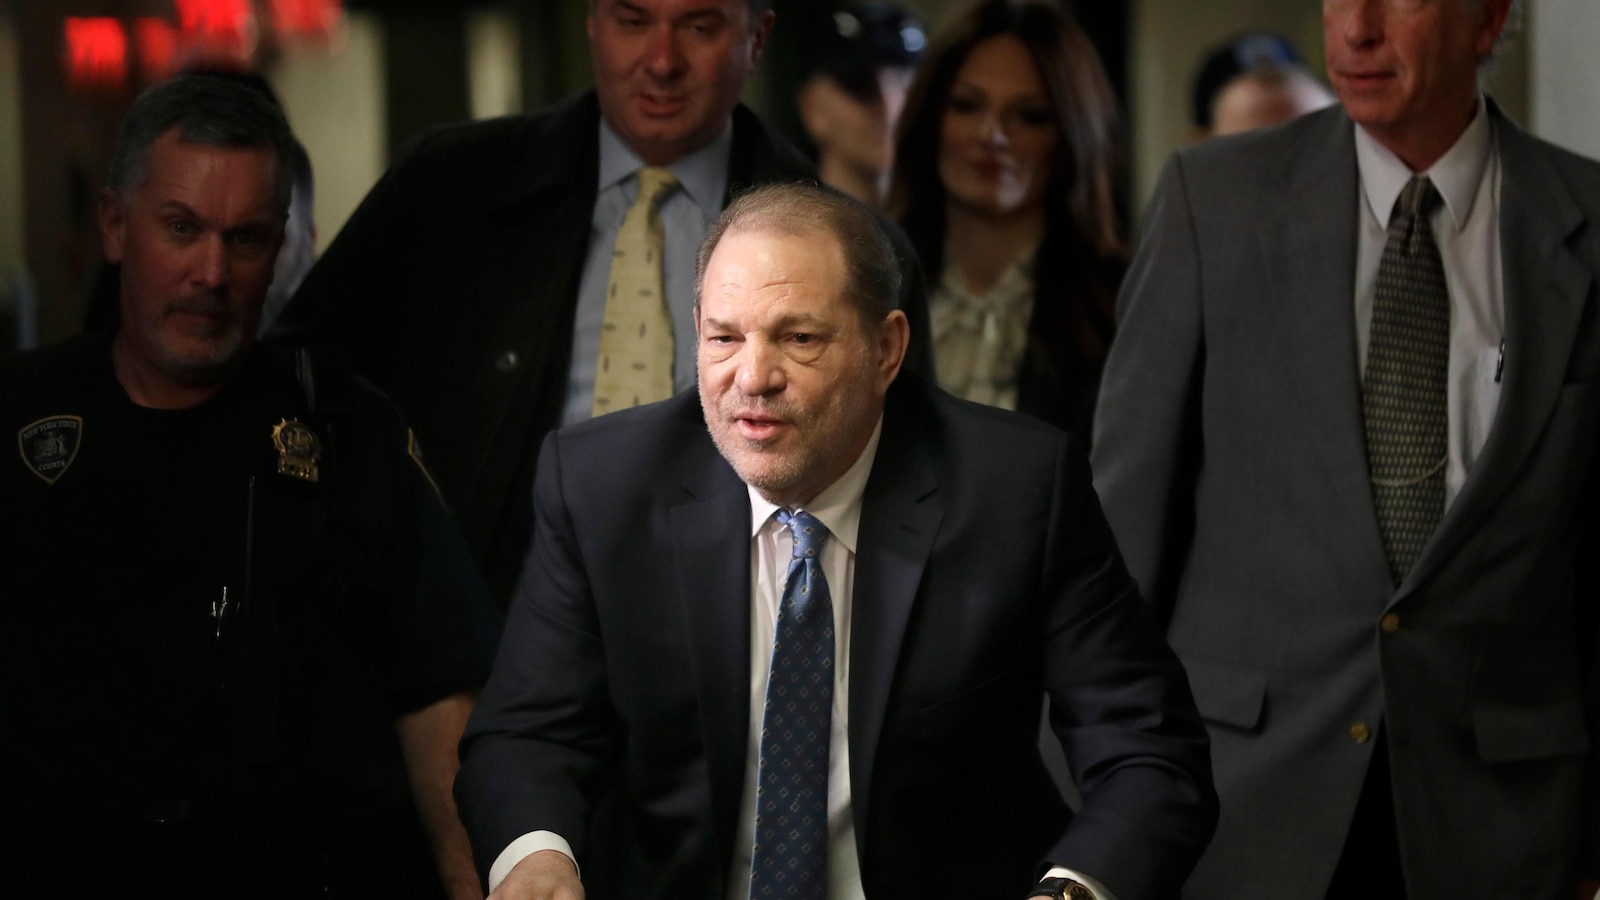 New York's Top Court to Hear Arguments on Weinstein's Appeal of 2020 Rape Conviction